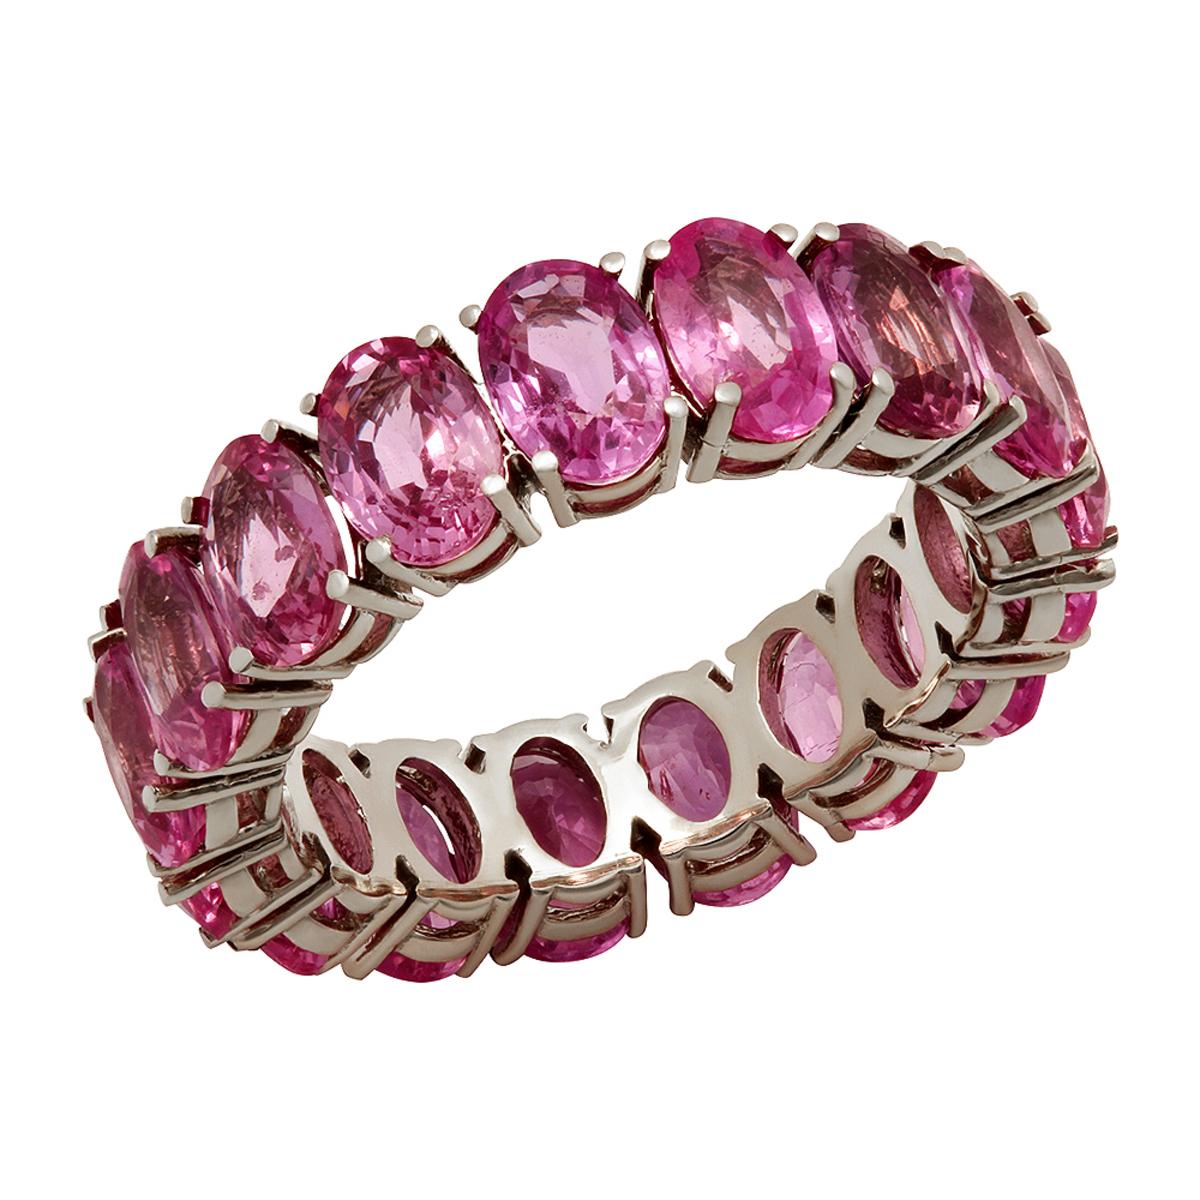 14k White Gold 10.16ct Pink Sapphire Eternity Band Ring